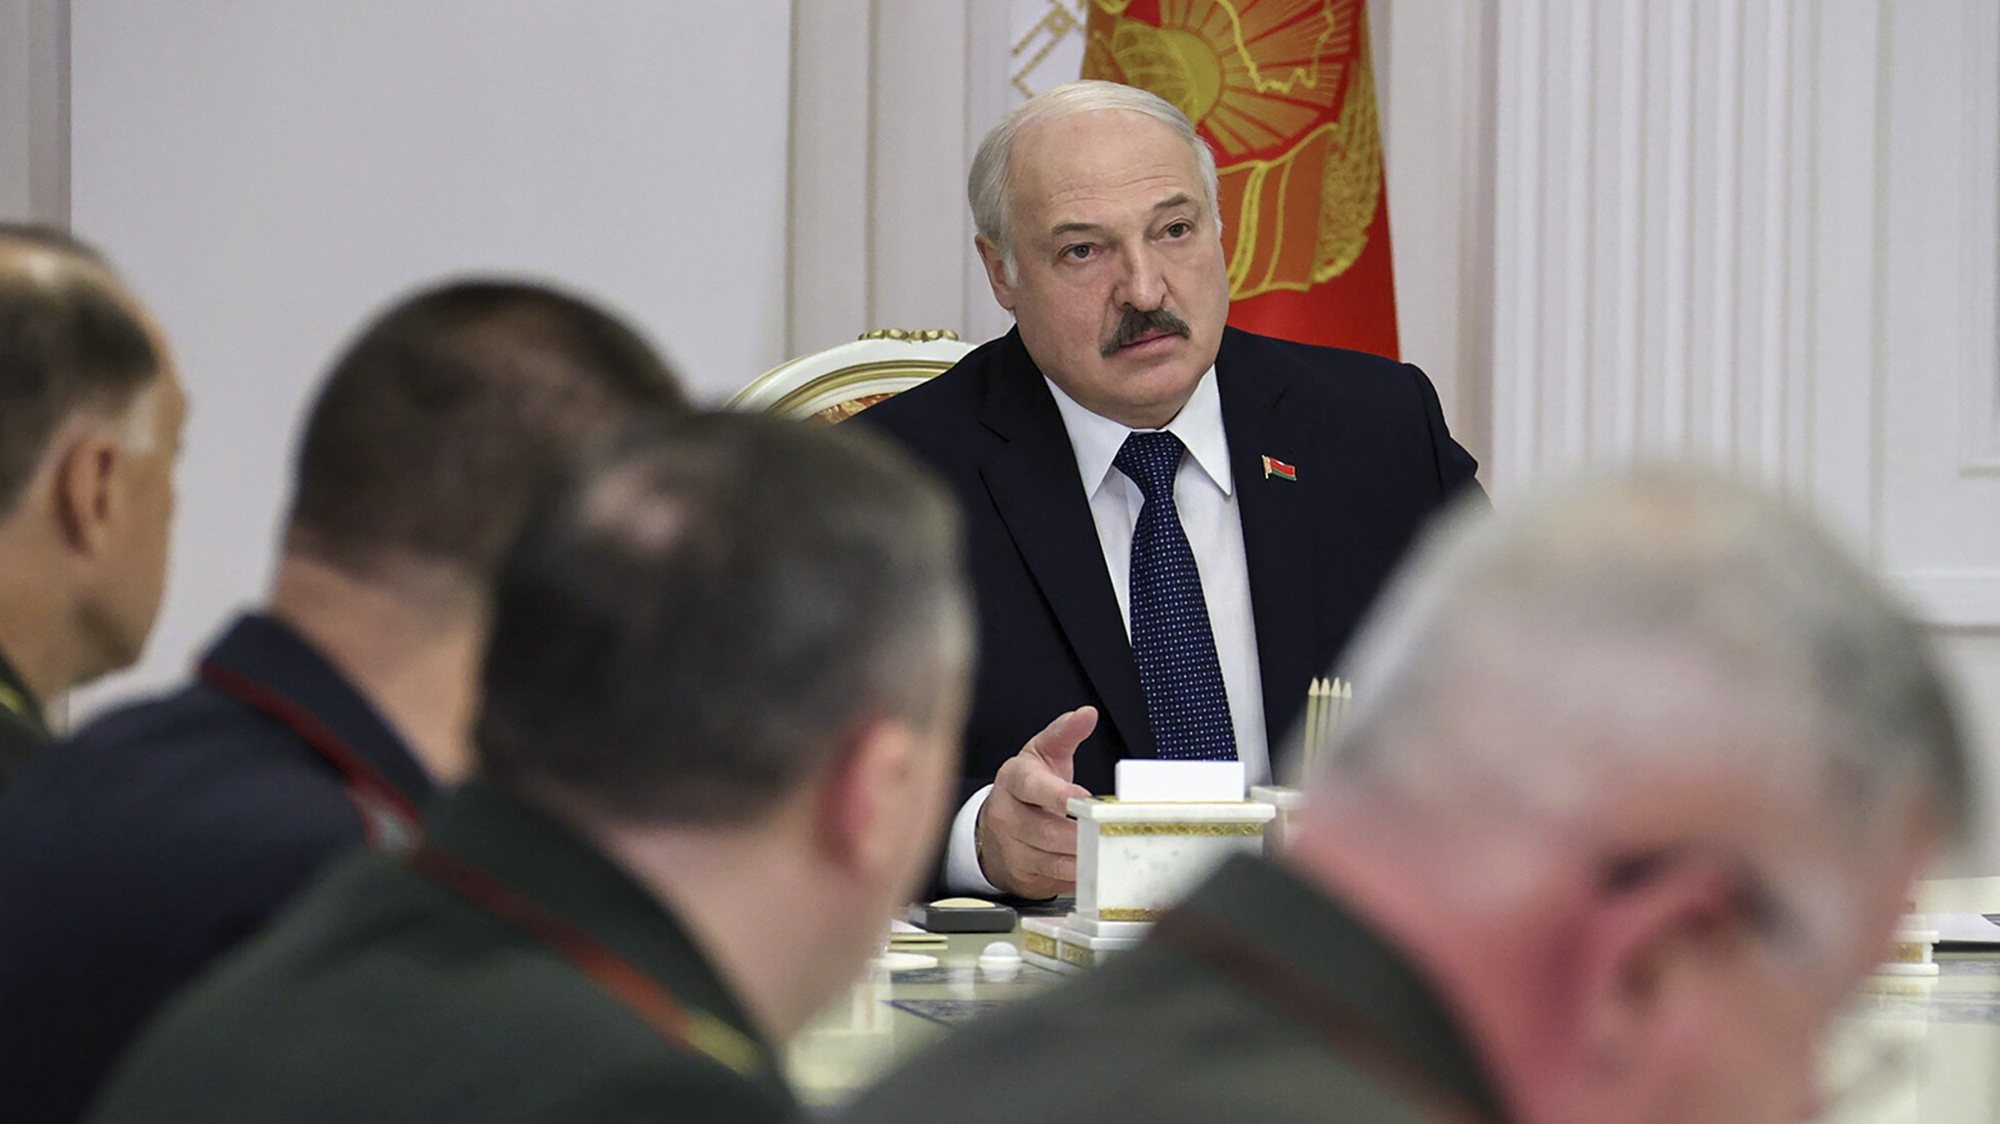 epa09585599 A handout photo made available by Belarus President Press service shows Belarusian President Aleksandr Lukashenko speaks during meeting to discuss situation at Belarus&#039; state border in Minsk, Belarus, 16 November 2021. Asylum-seekers, refugees and migrants from the Middle East clashed with Polish Police forces at Belarusian-Polish checkpoint of Bruzgi-Kuznica trying to forcly enter into Polish territory. Thousands people who want to obtain asylum in the European Union have been trapped at low temperatures at the border since 08 November.  EPA/BELARUS PRESIDENT PRESS SERVICE / HANDOUT  HANDOUT EDITORIAL USE ONLY/NO SALES